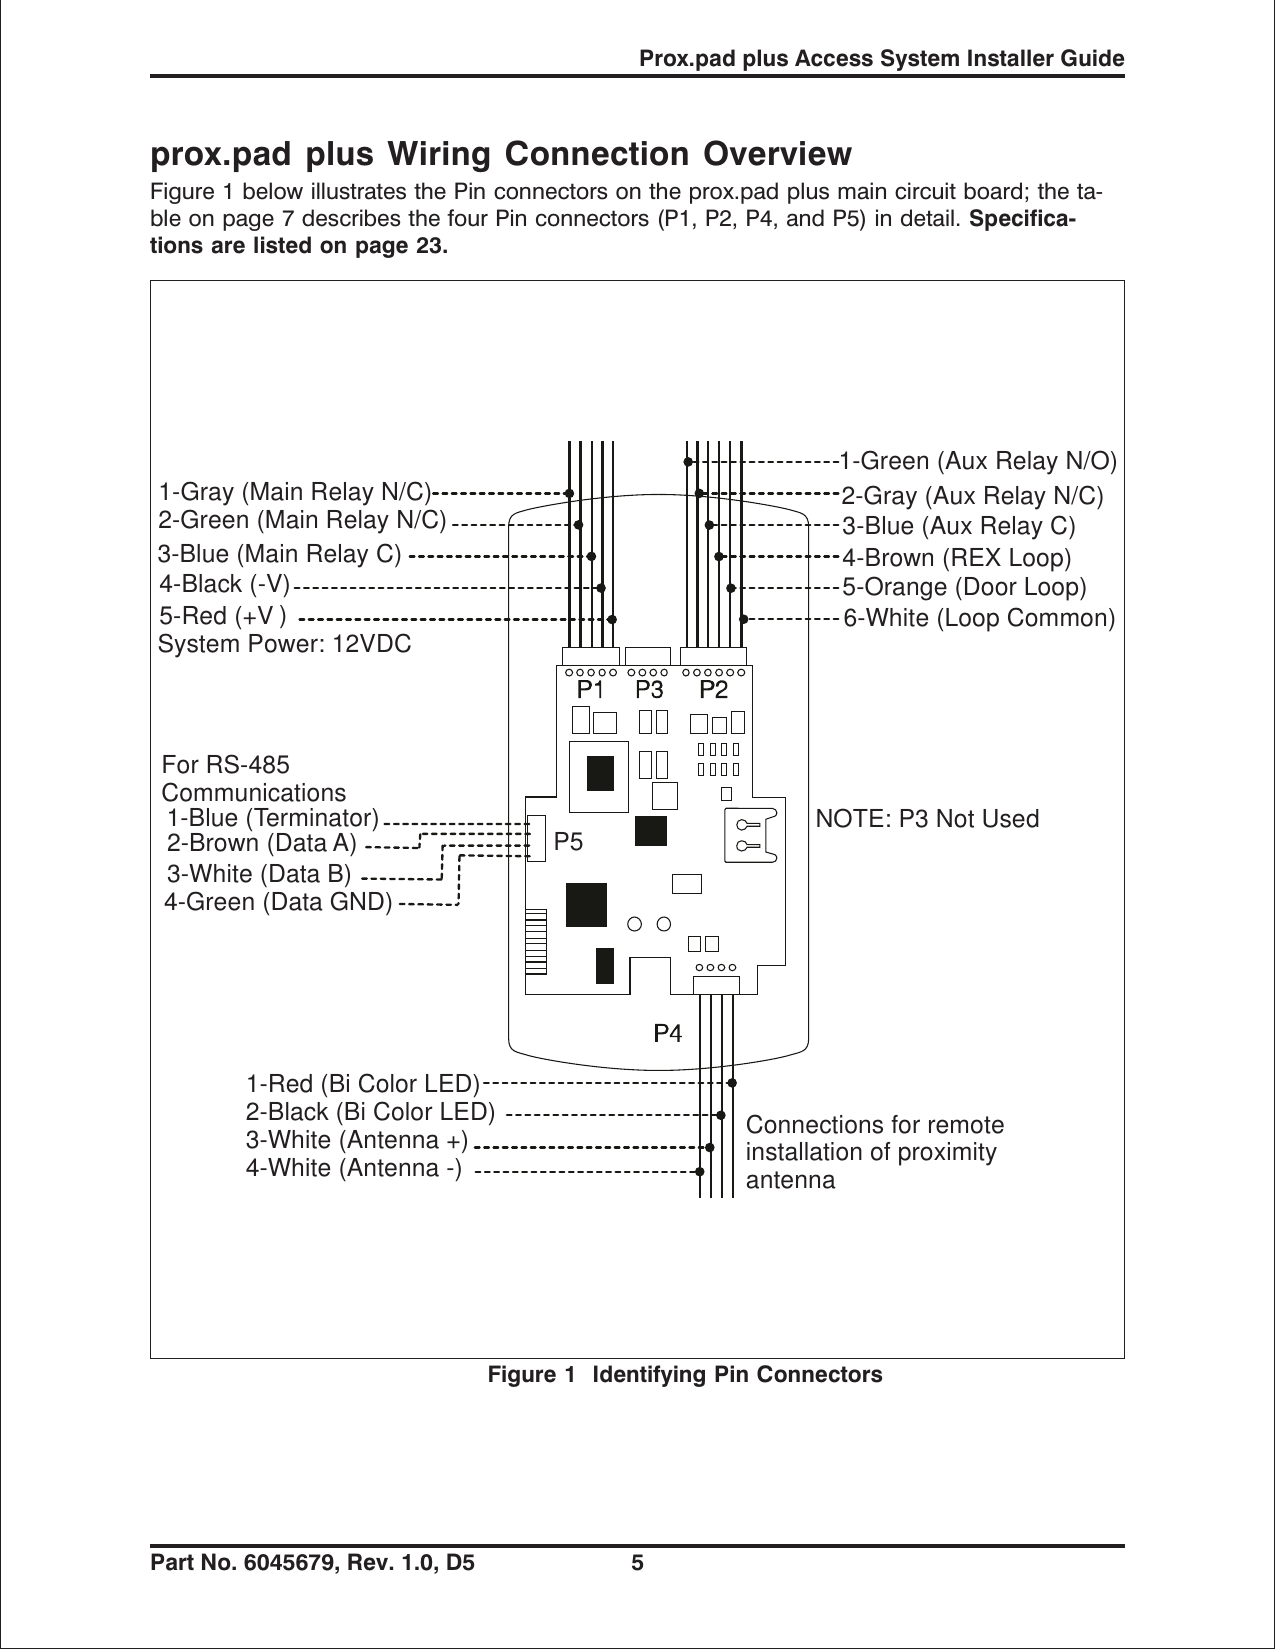 prox.pad plus Wiring Connection OverviewFigure 1 below illustrates the Pin connectors on the prox.pad plus main circuit board; the ta-ble on page 7 describes the four Pin connectors (P1, P2, P4, and P5) in detail. Specifica-tions are listed on page 23.P5 NOTE: P3 Not Used1-Blue (Terminator)2-Brown (Data A)3-White (Data B)4-Green (Data GND)System Power: 12VDCConnections for remoteinstallation of proximityantennaFor RS-485Communications1-Gray (Main Relay N/C)2-Green (Main Relay N/C)3-Blue (Main Relay C)4-Black (-V)5-Red (+V1-Green (Aux Relay N/O)2-Gray (Aux Relay N/C)3-Blue (Aux Relay C)4-Brown (REX Loop)5-Orange (Door Loop)6-White (Loop Common)1-Red (Bi Color LED)2-Black (Bi Color LED)3-White (Antenna +)4-White (Antenna -))Figure 1 Identifying Pin ConnectorsProx.pad plus Access System Installer GuidePart No. 6045679, Rev. 1.0, D5 5